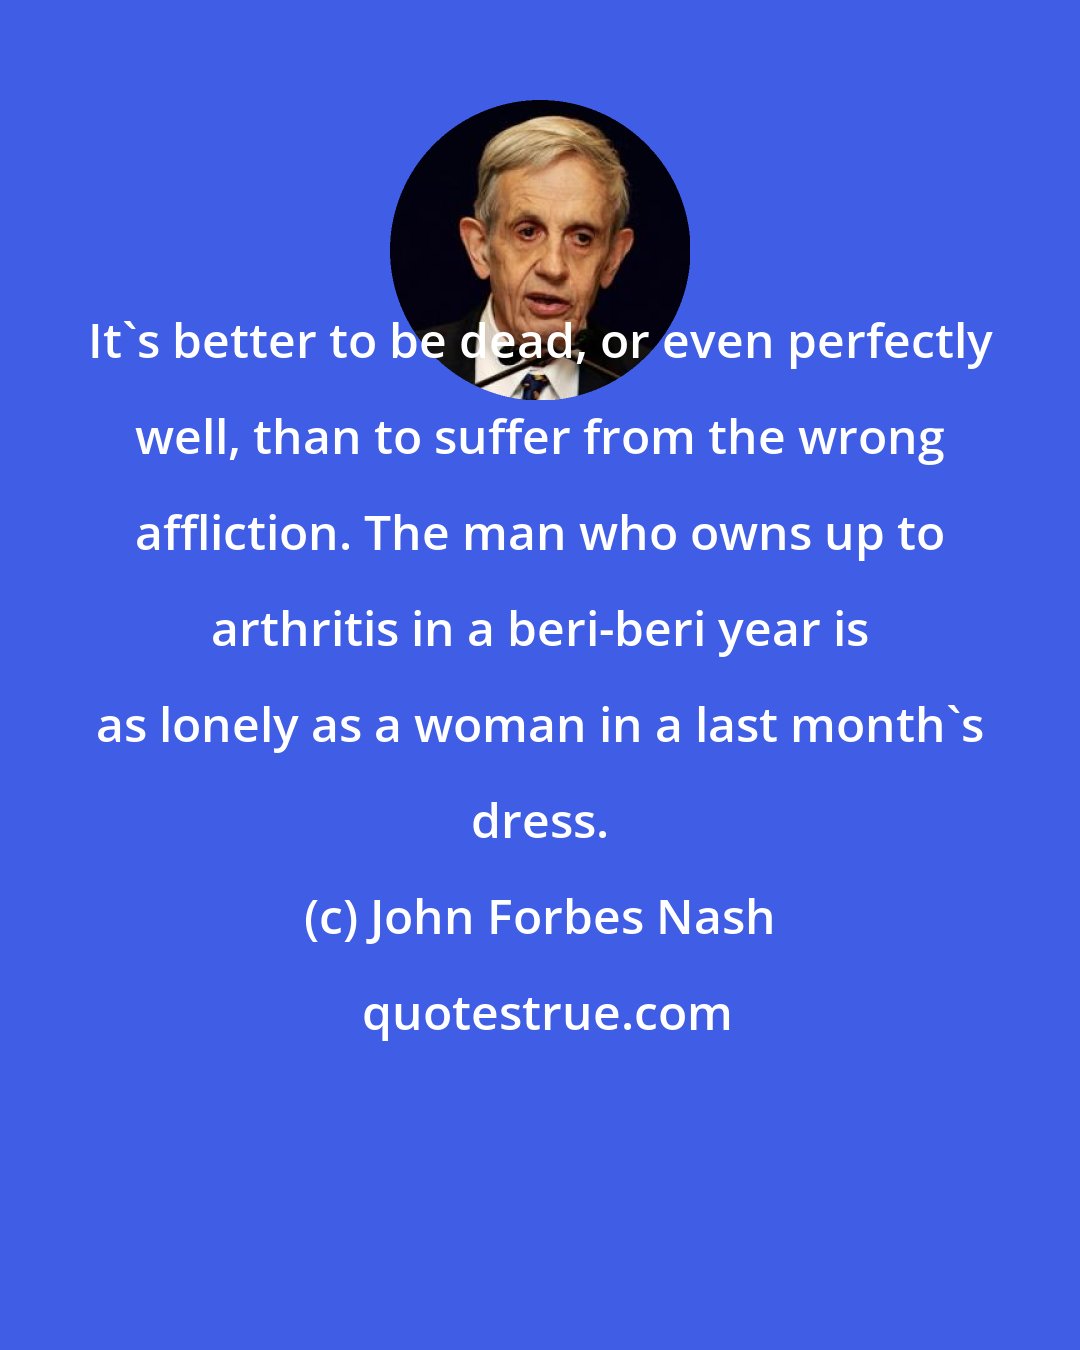 John Forbes Nash: It's better to be dead, or even perfectly well, than to suffer from the wrong affliction. The man who owns up to arthritis in a beri-beri year is as lonely as a woman in a last month's dress.